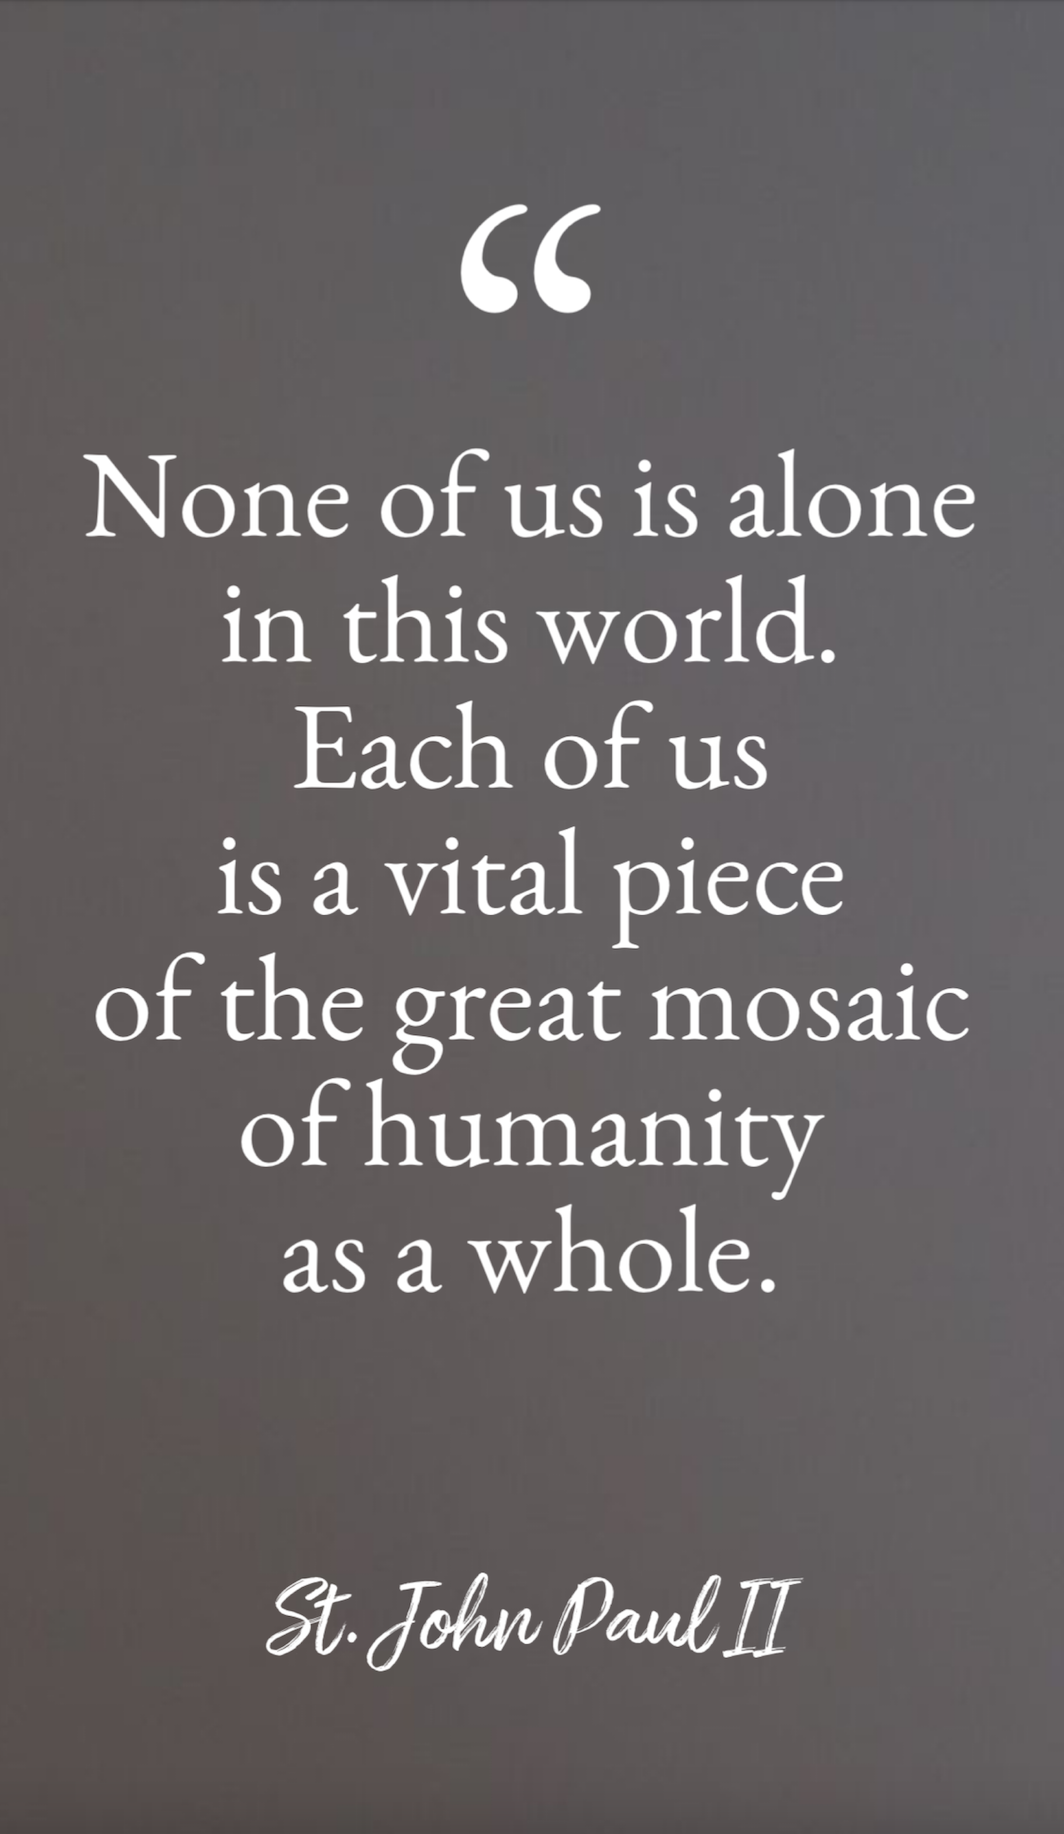 “None of us is alone in this world. Each of us is a vital piece of the great mosaic of humanity as a whole.” —St. John Paul II